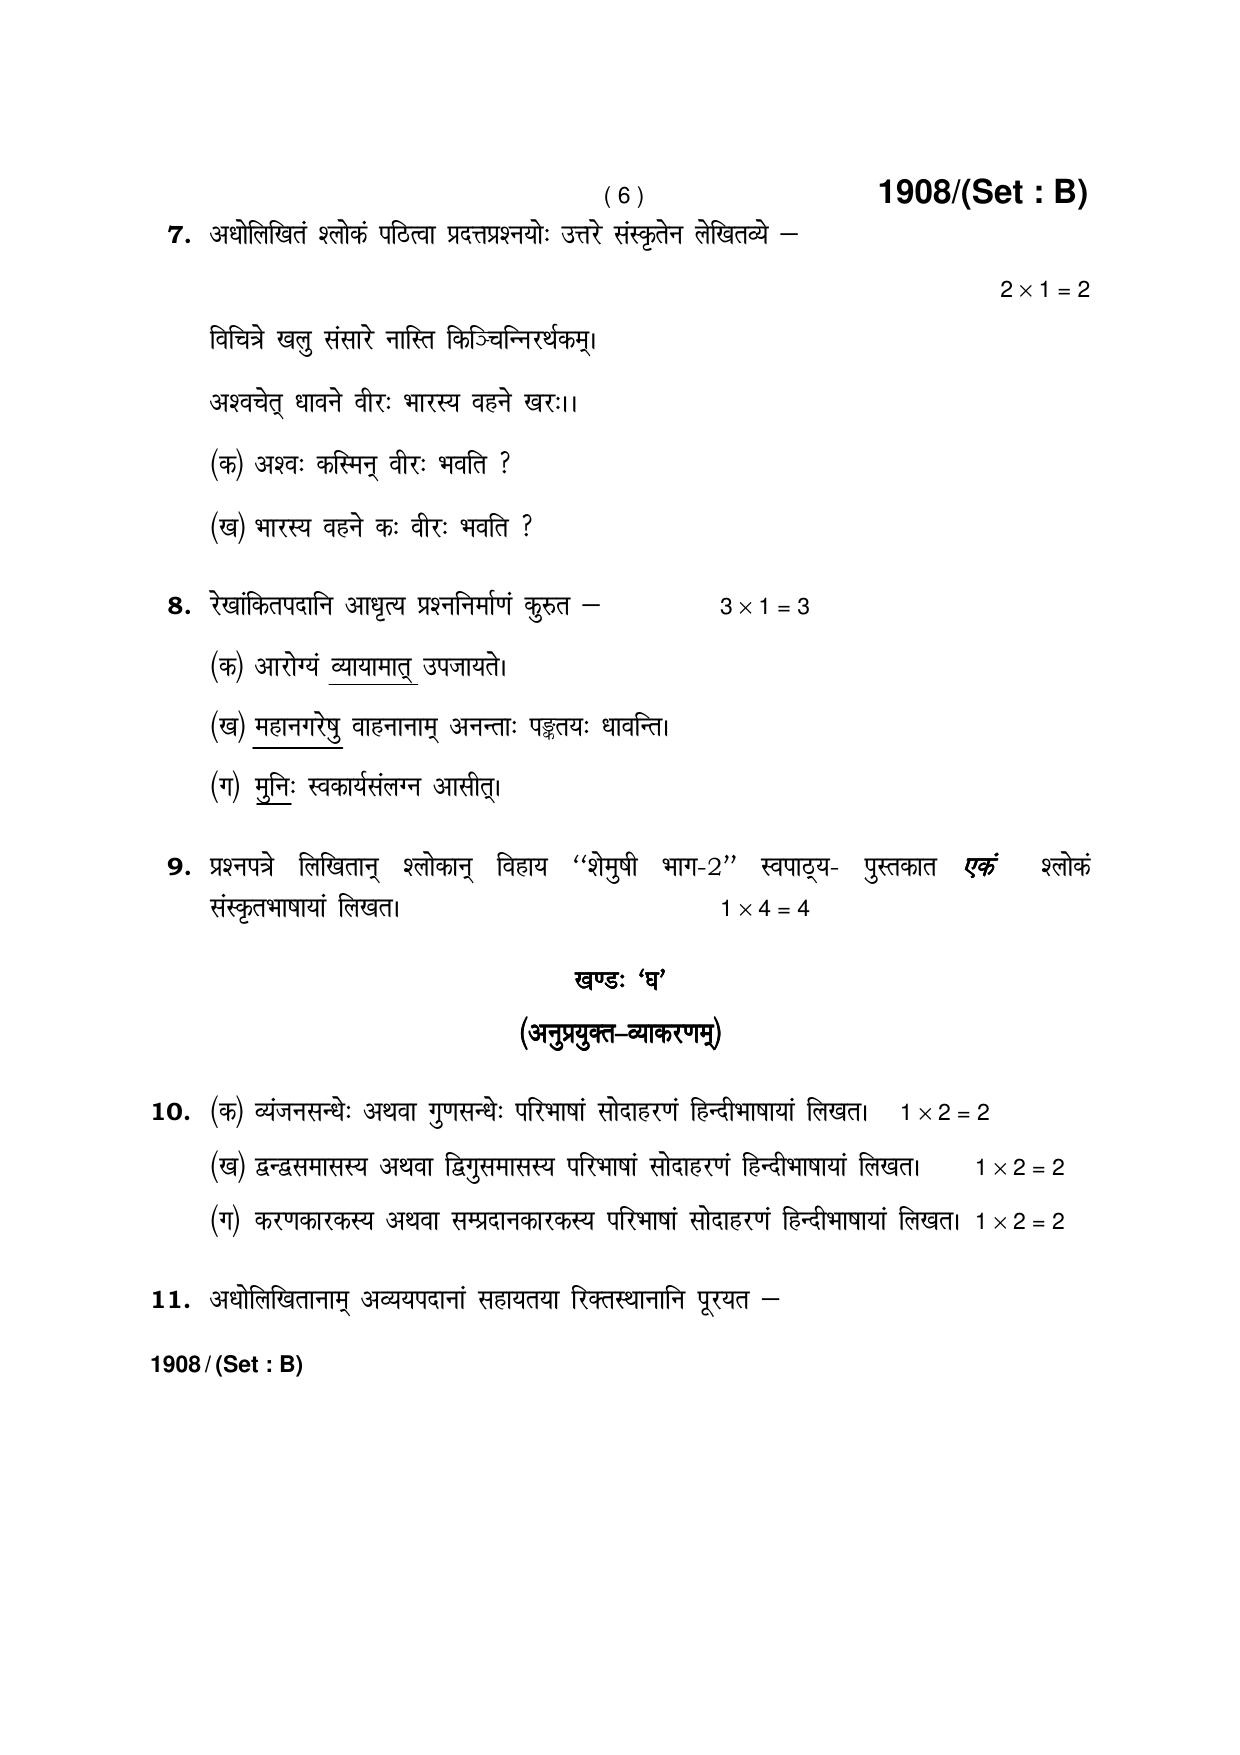 Haryana Board HBSE Class 10 Sanskrit -B 2017 Question Paper - Page 6